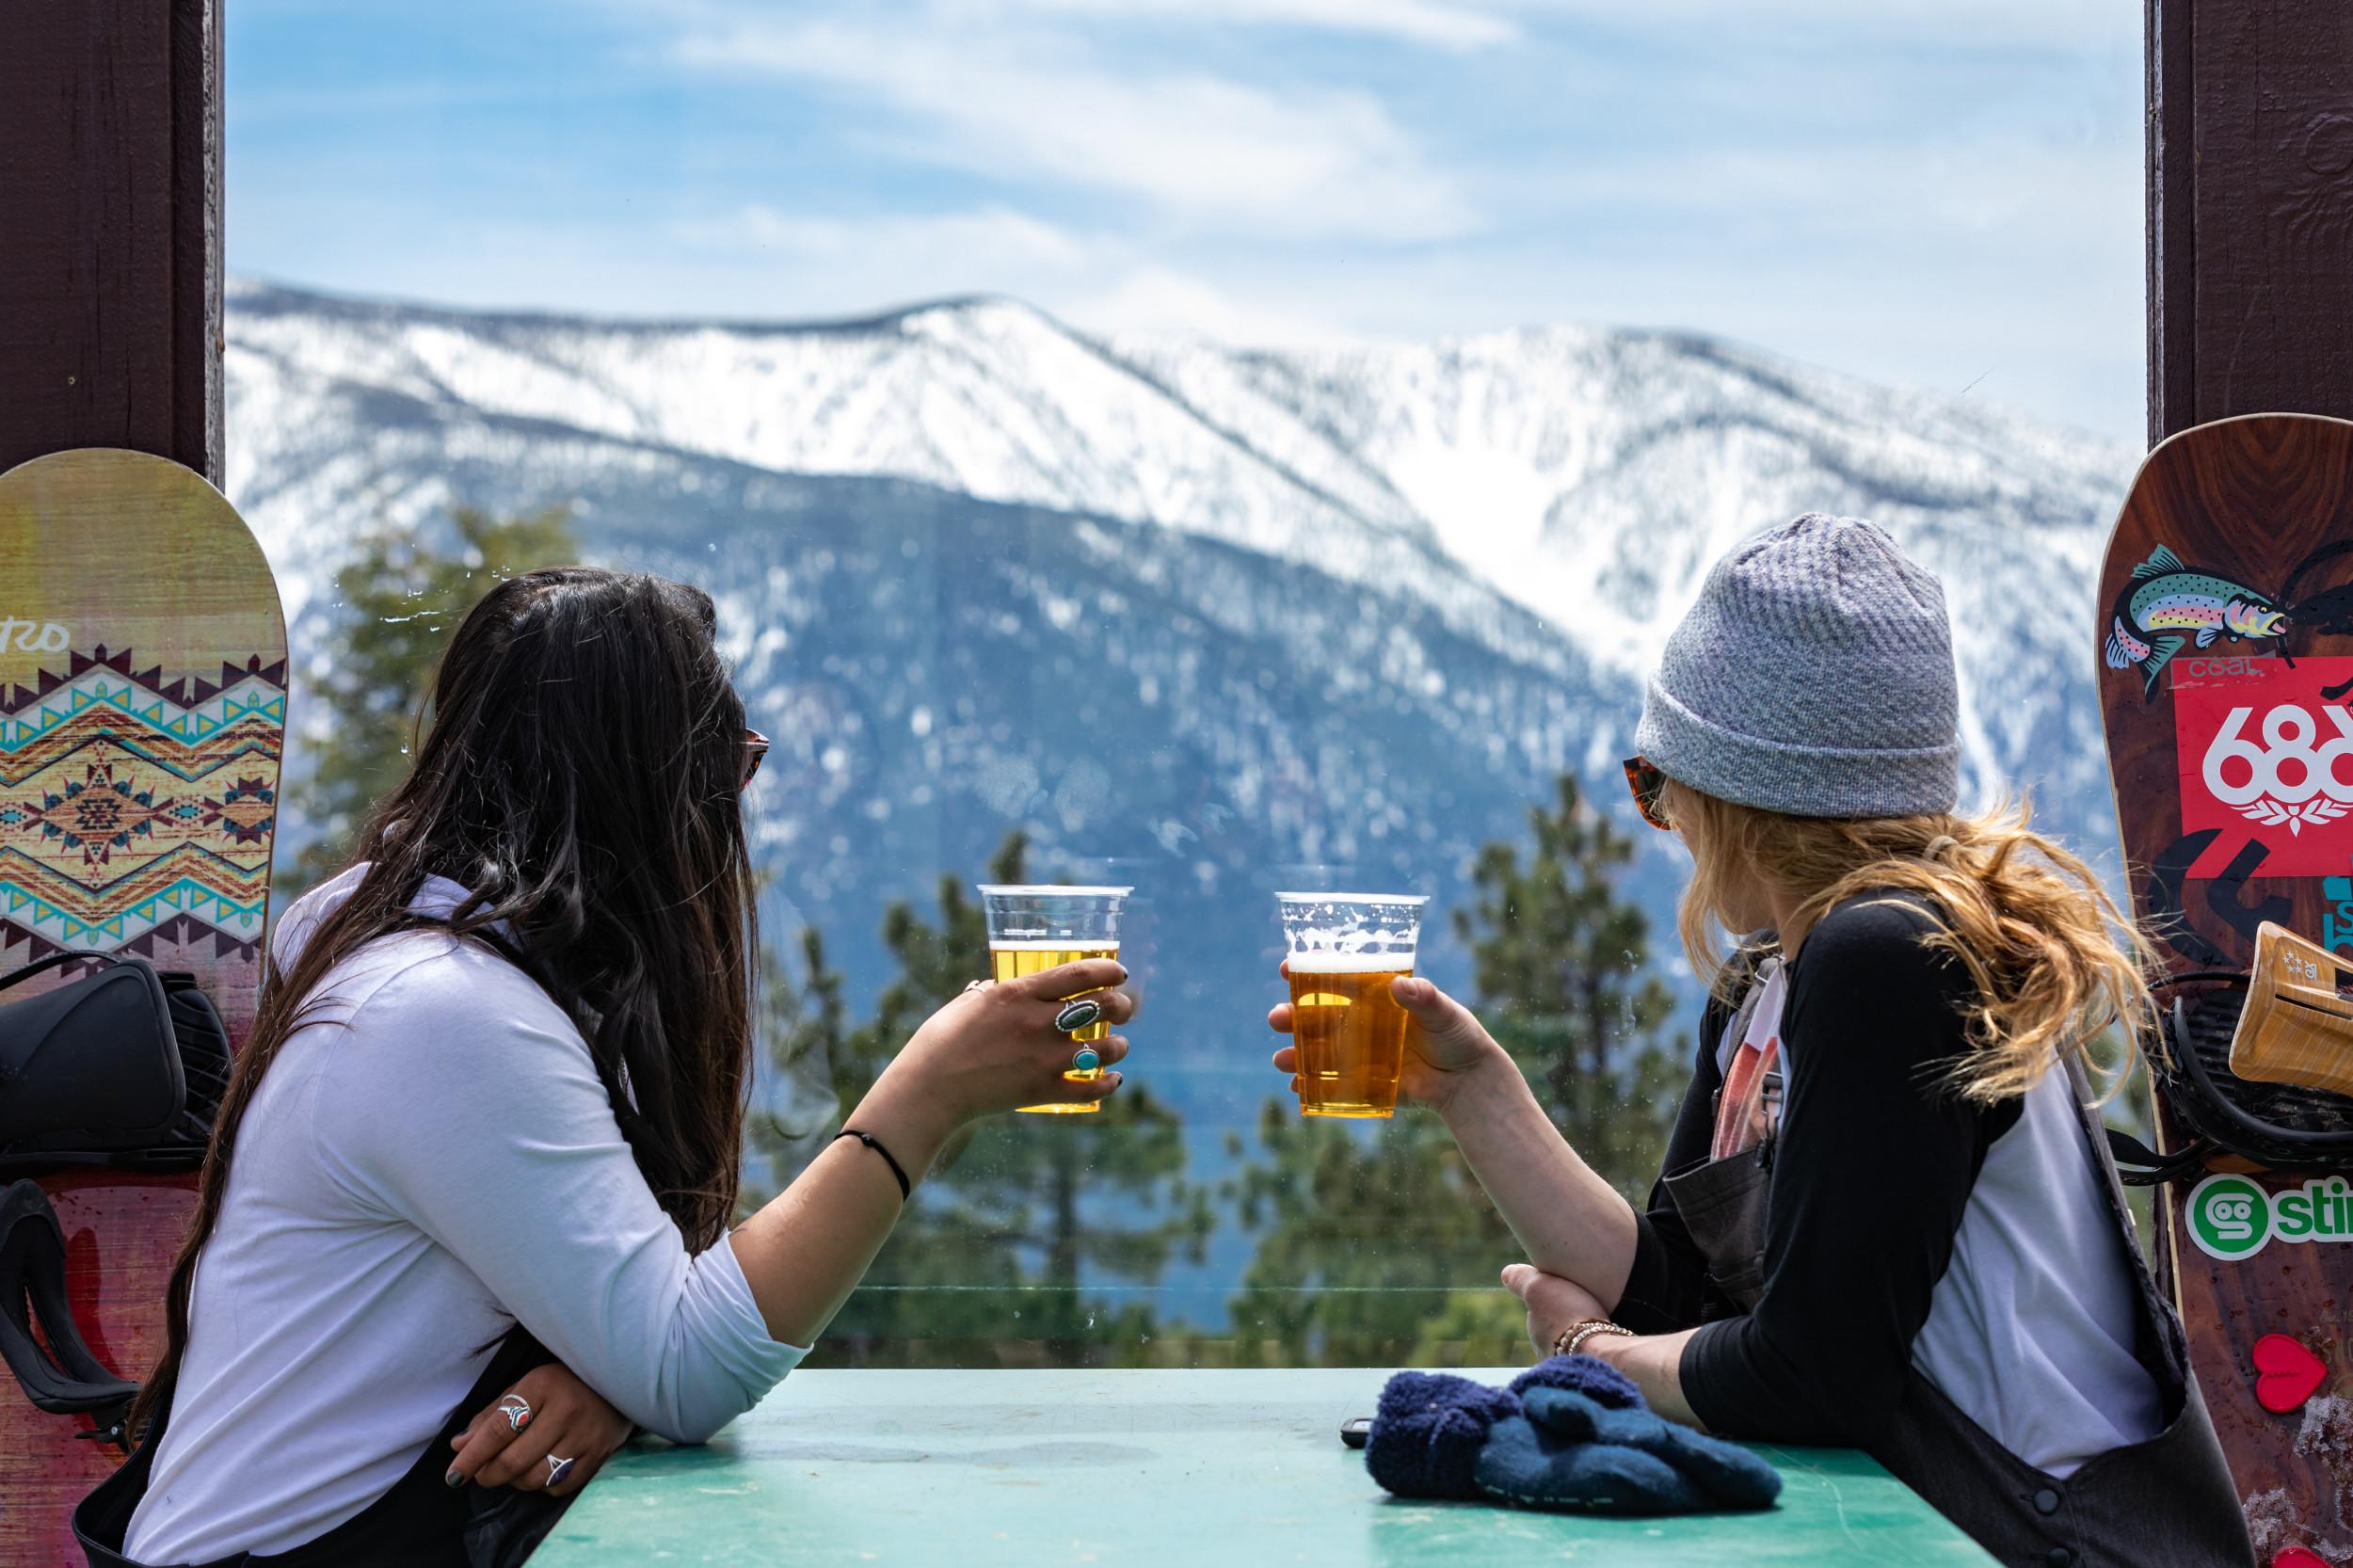 Two people sitting at a table holding beers looking at the mountain view